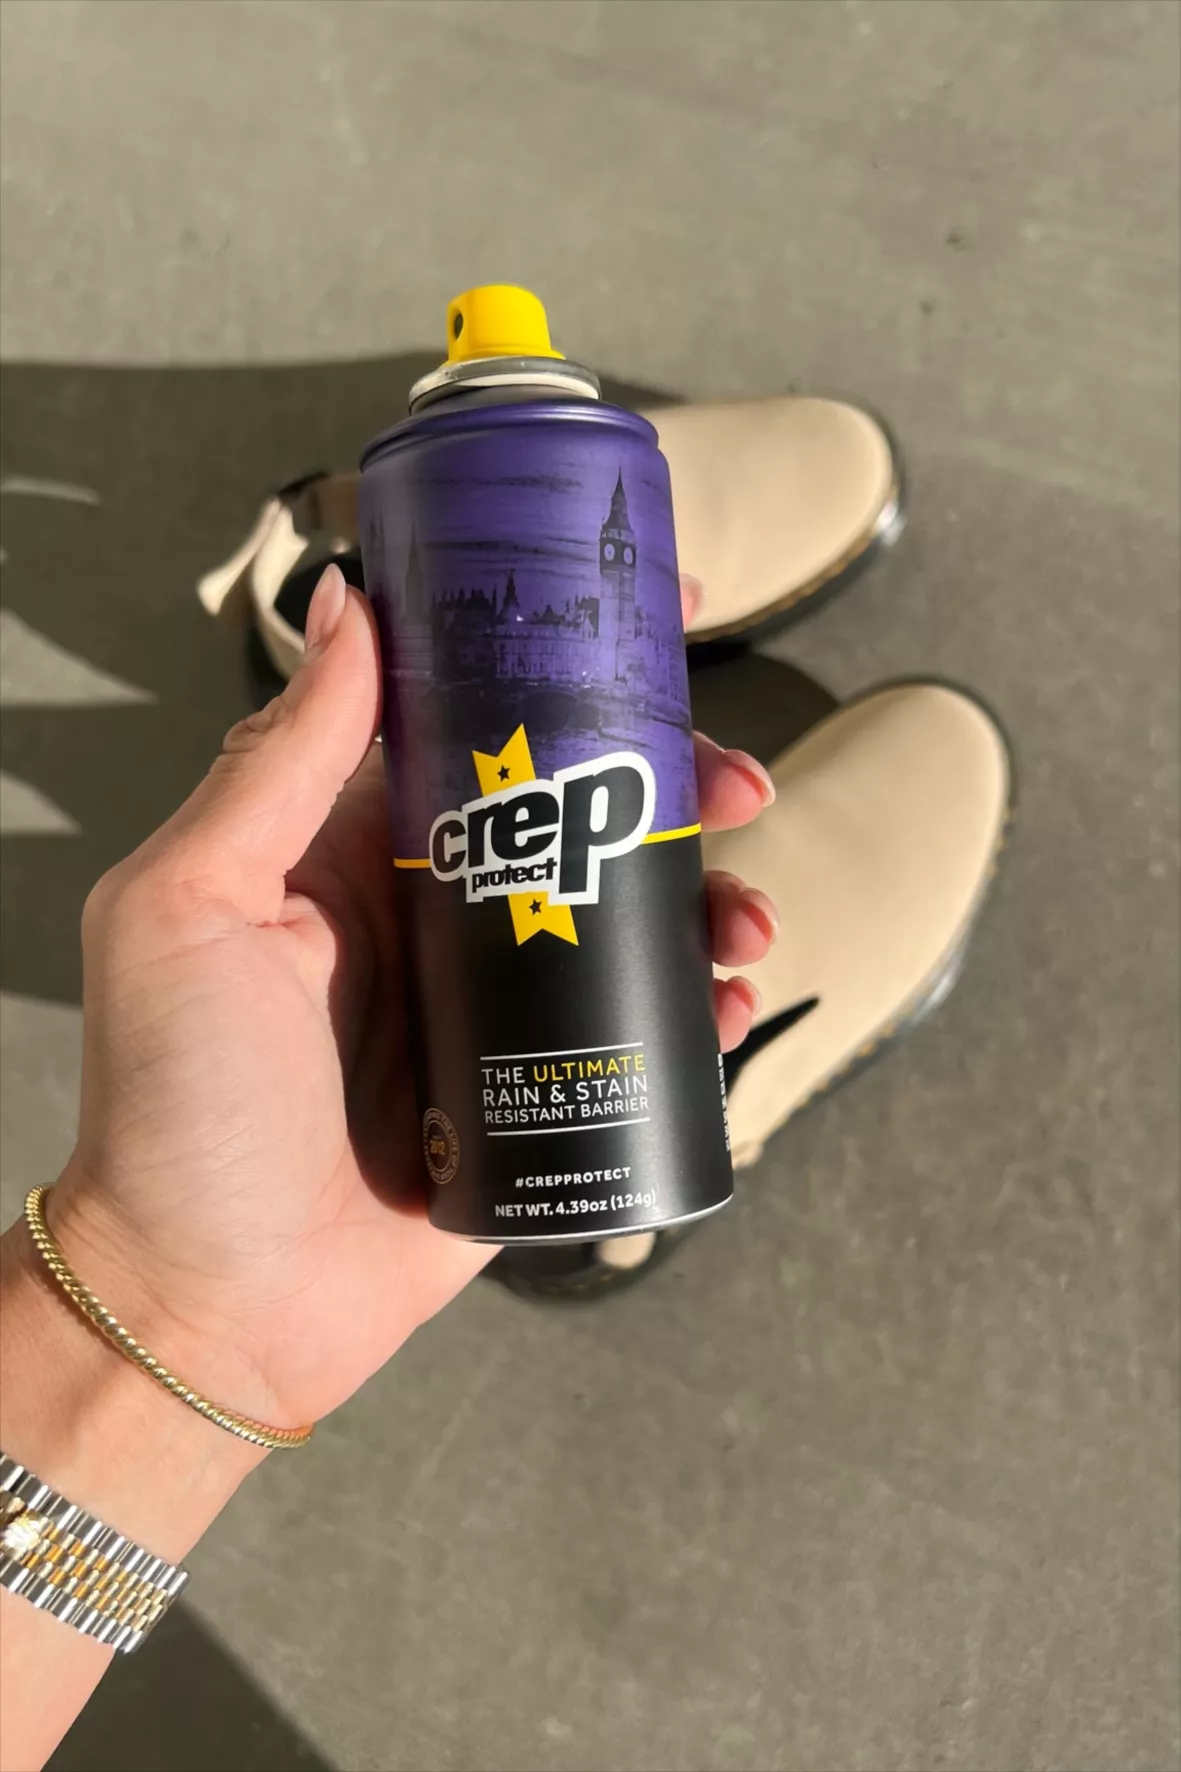 Crep Protect Ultimate Rain and Stain Protection Spray